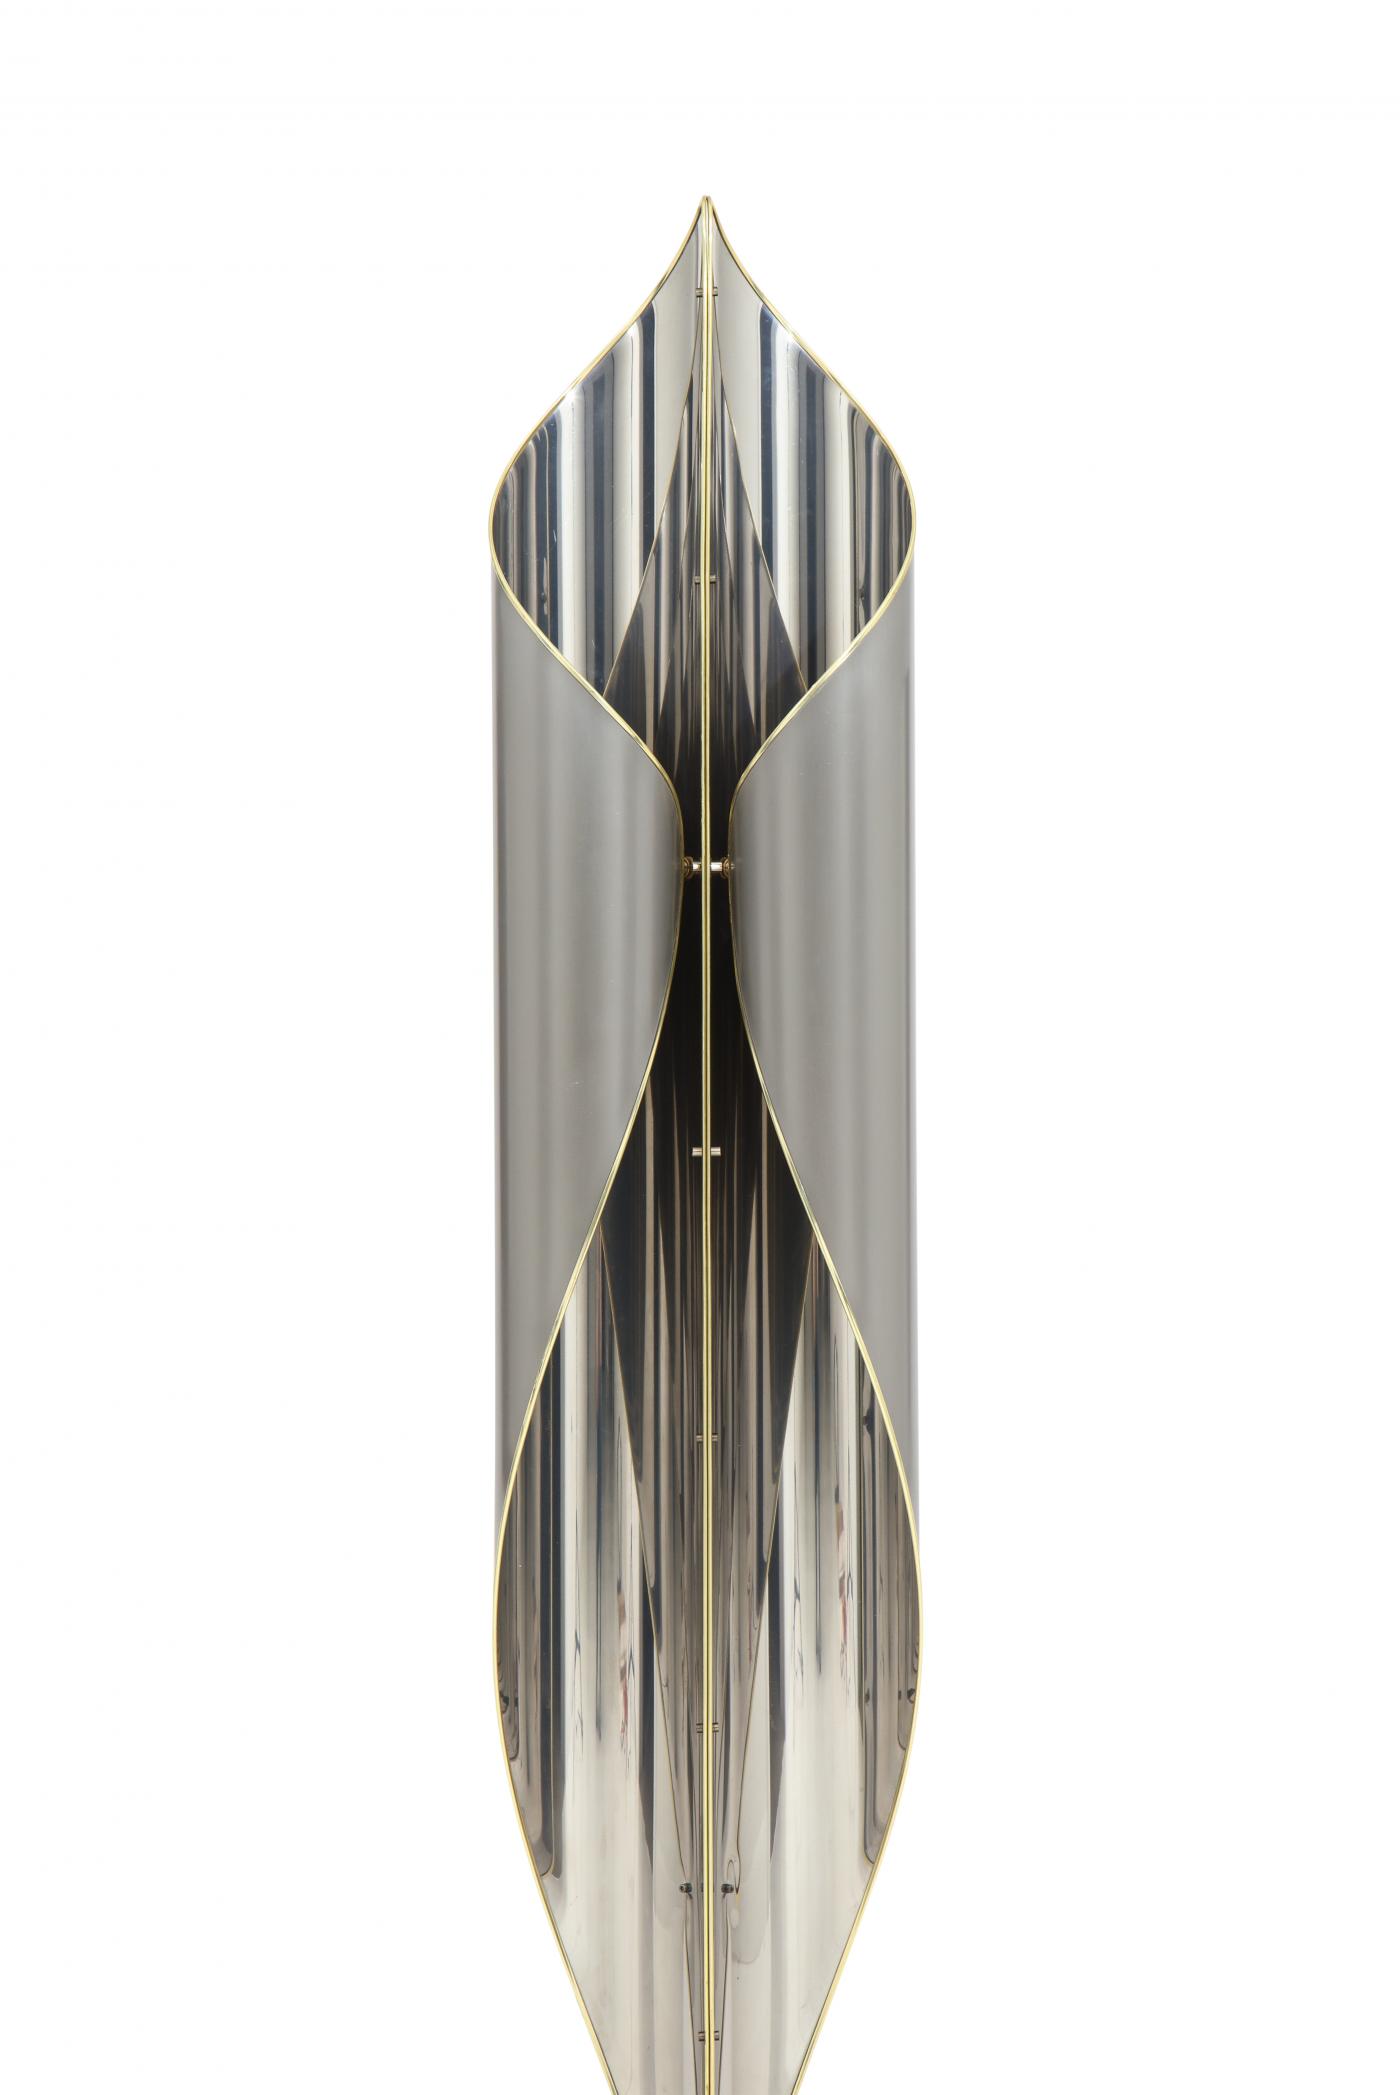 Floor lamp in chrome and steel combined with Brass details.